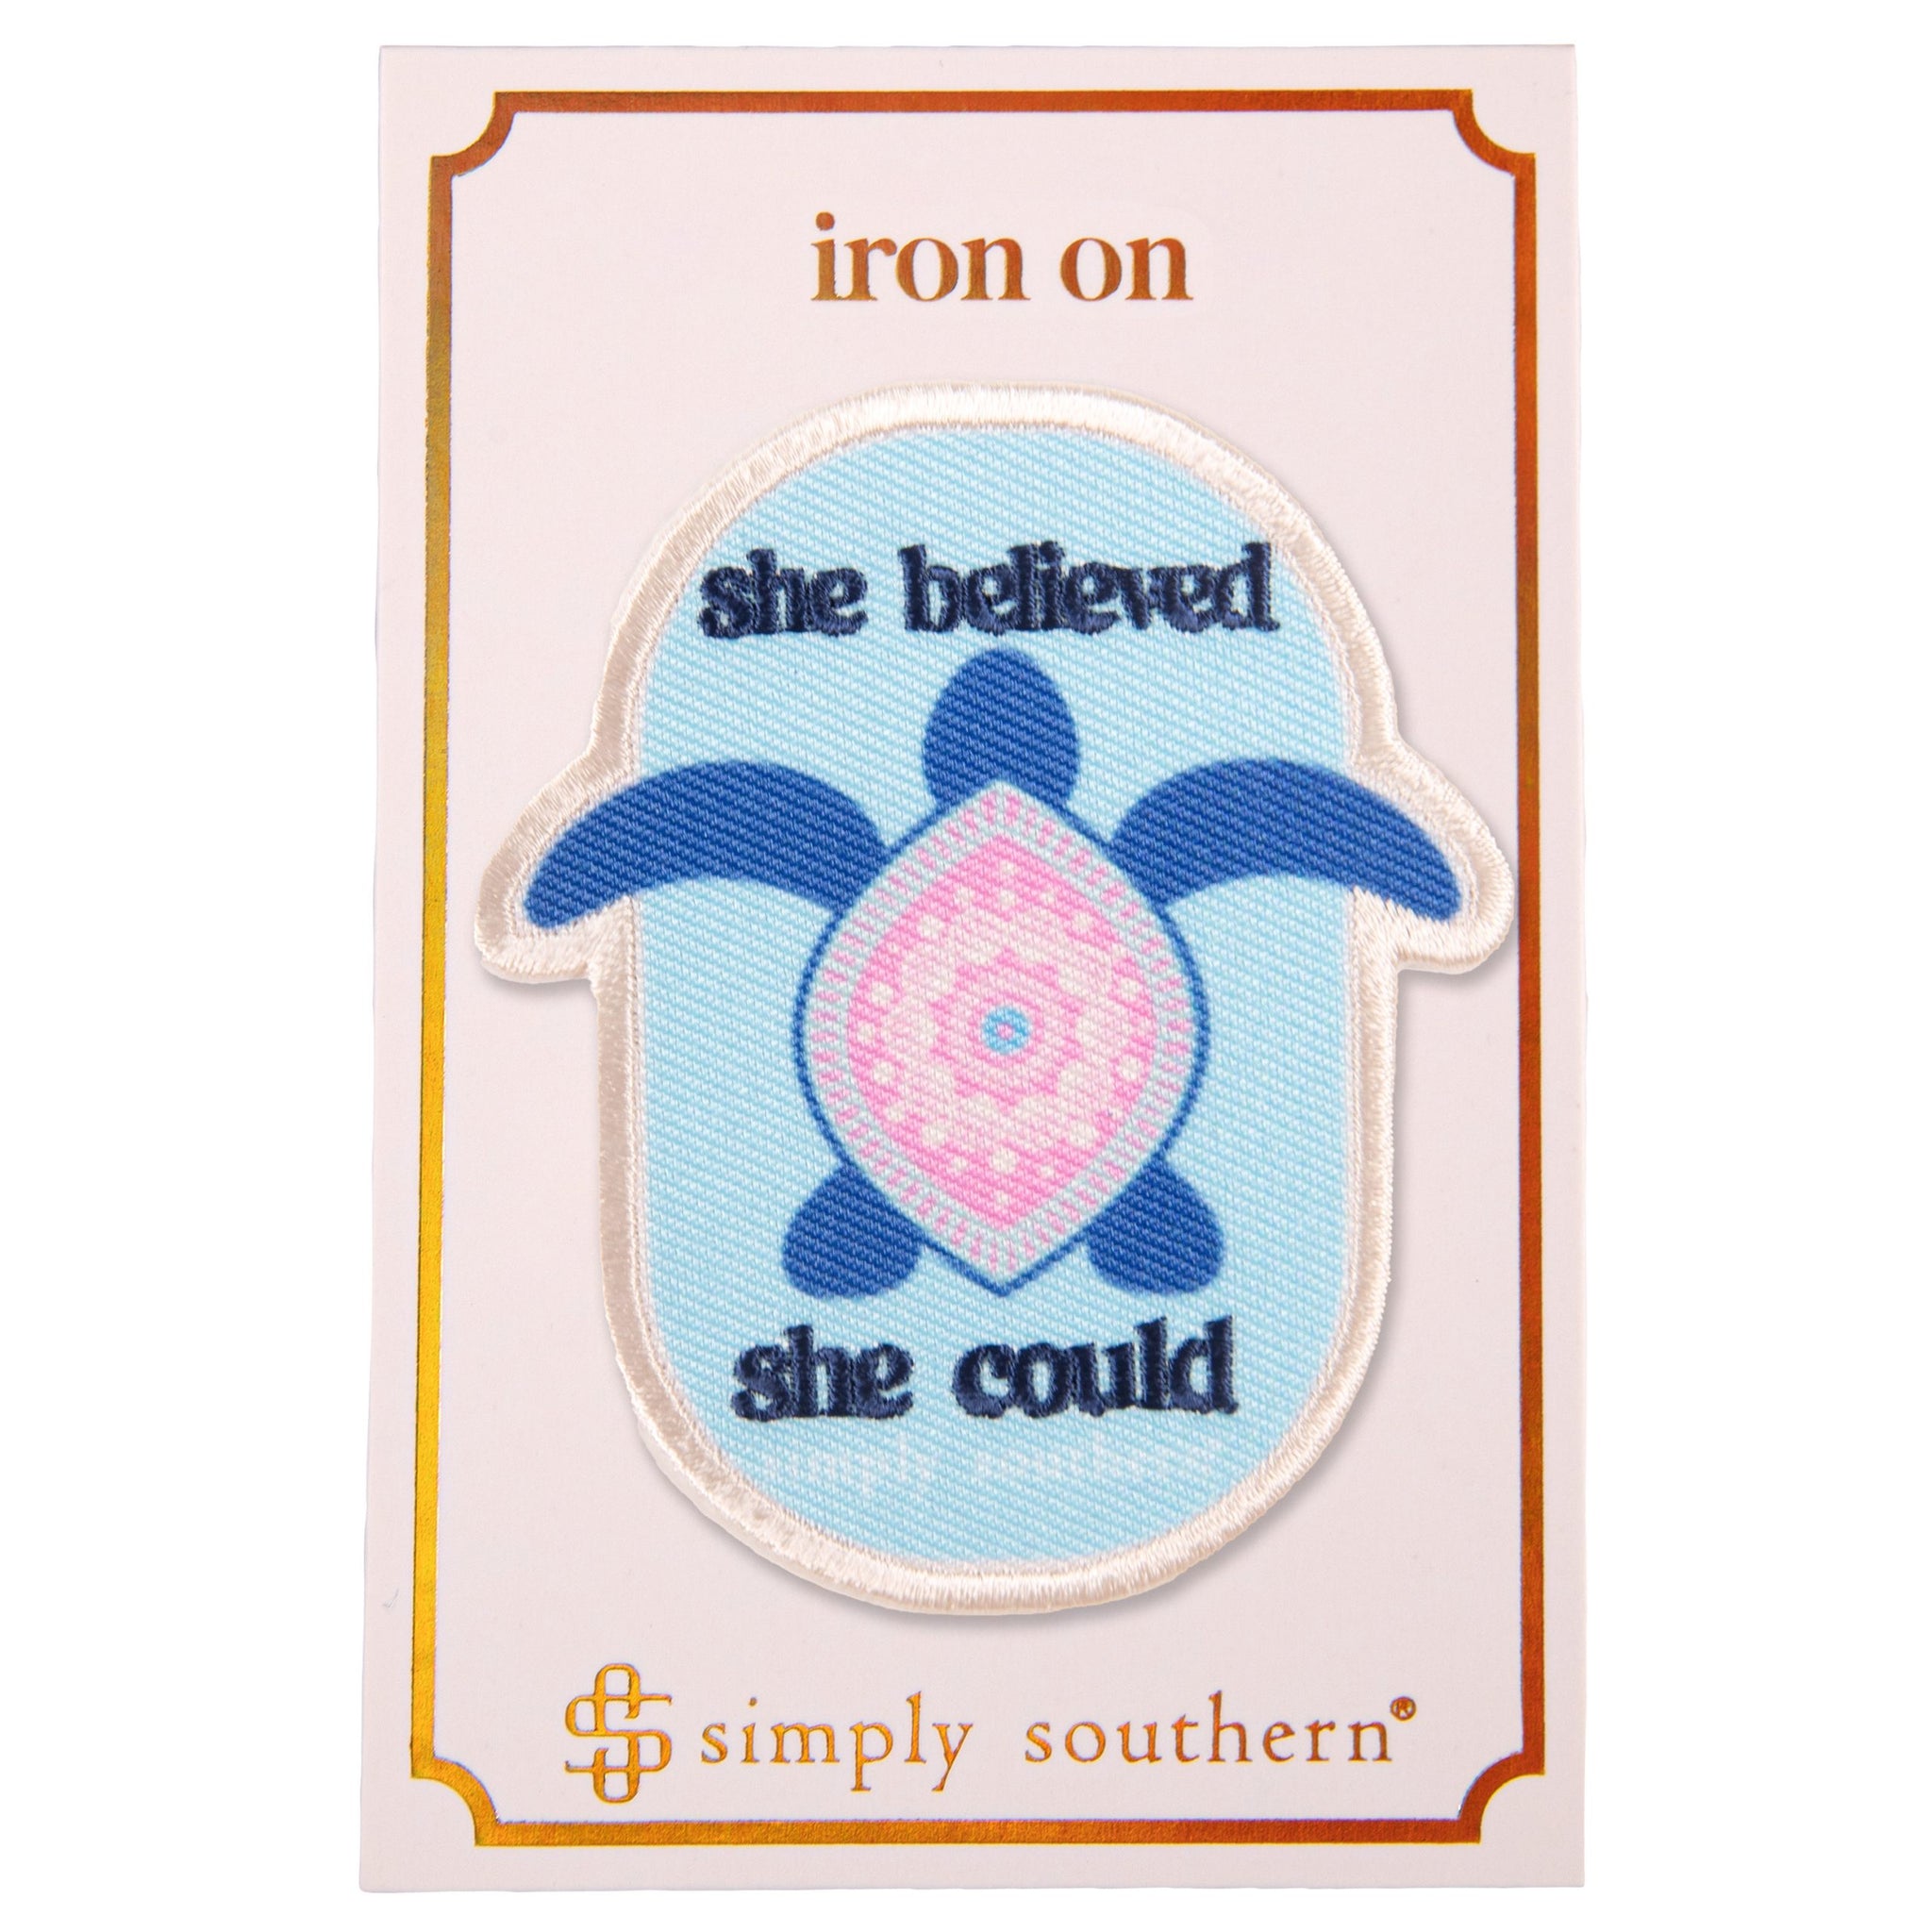 Simply Iron Patch